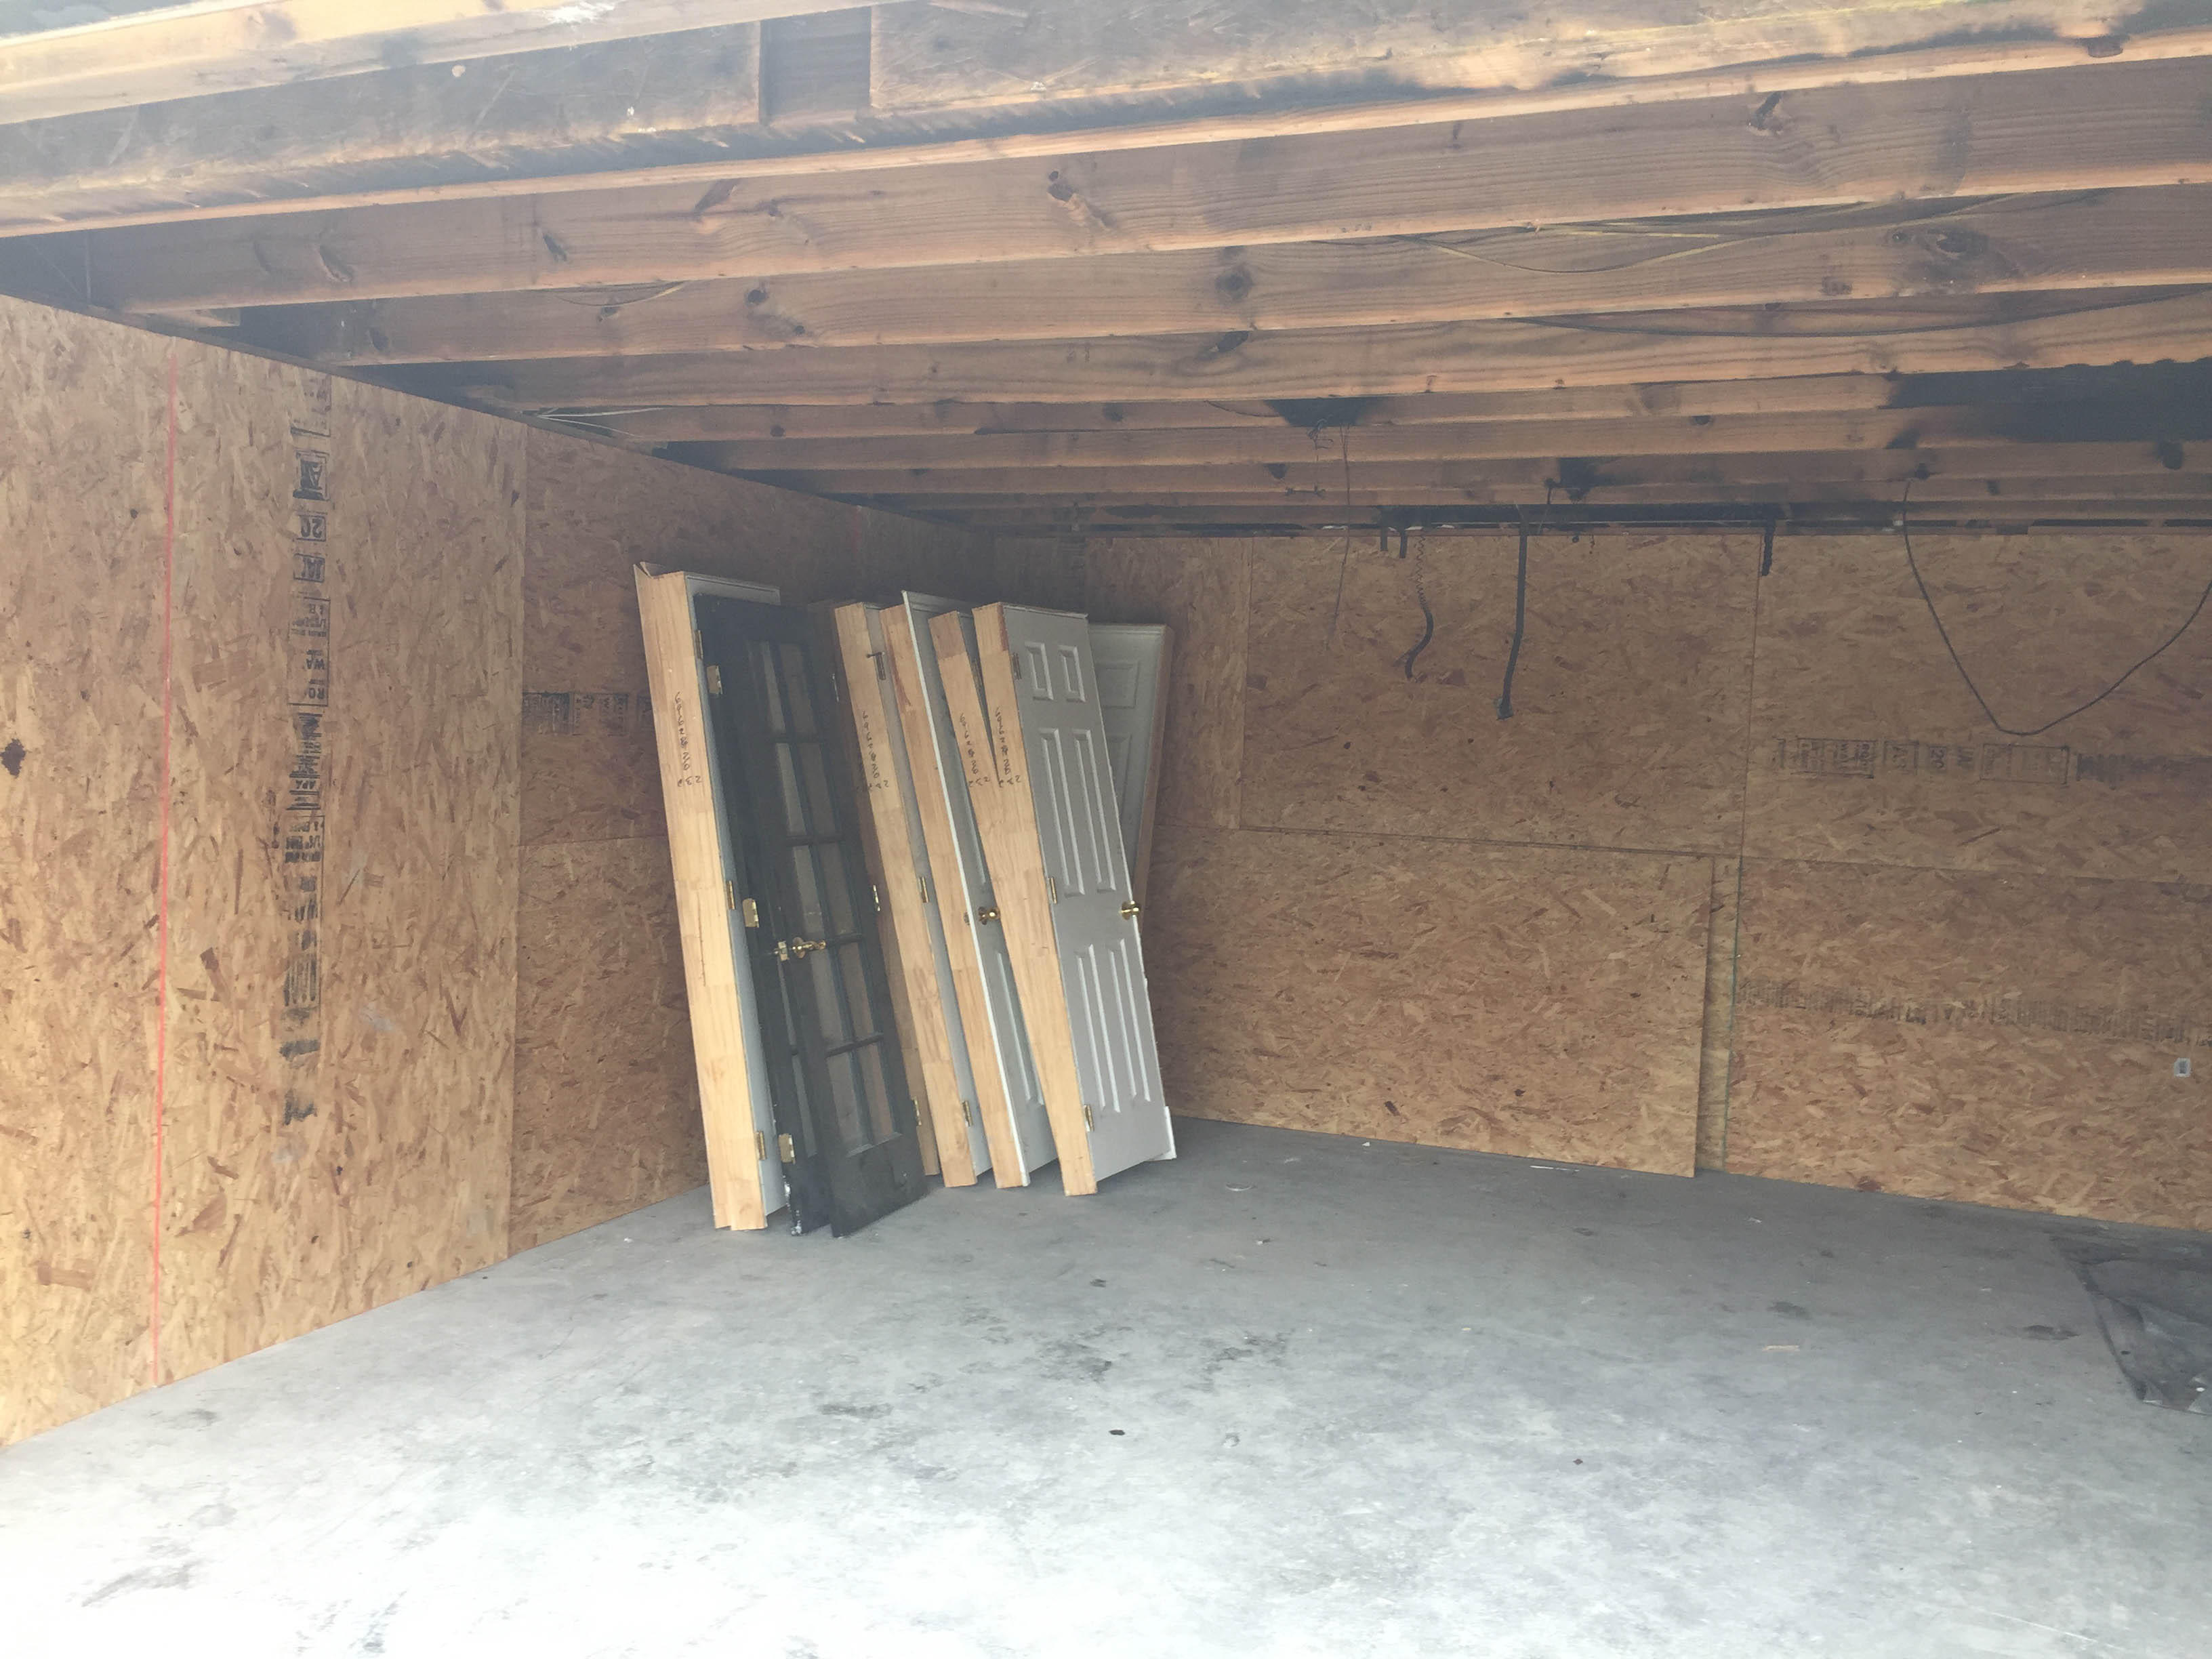 When working on restoration jobs that include property damage, our first priority is to determine what steps to take to save the structure and contents.